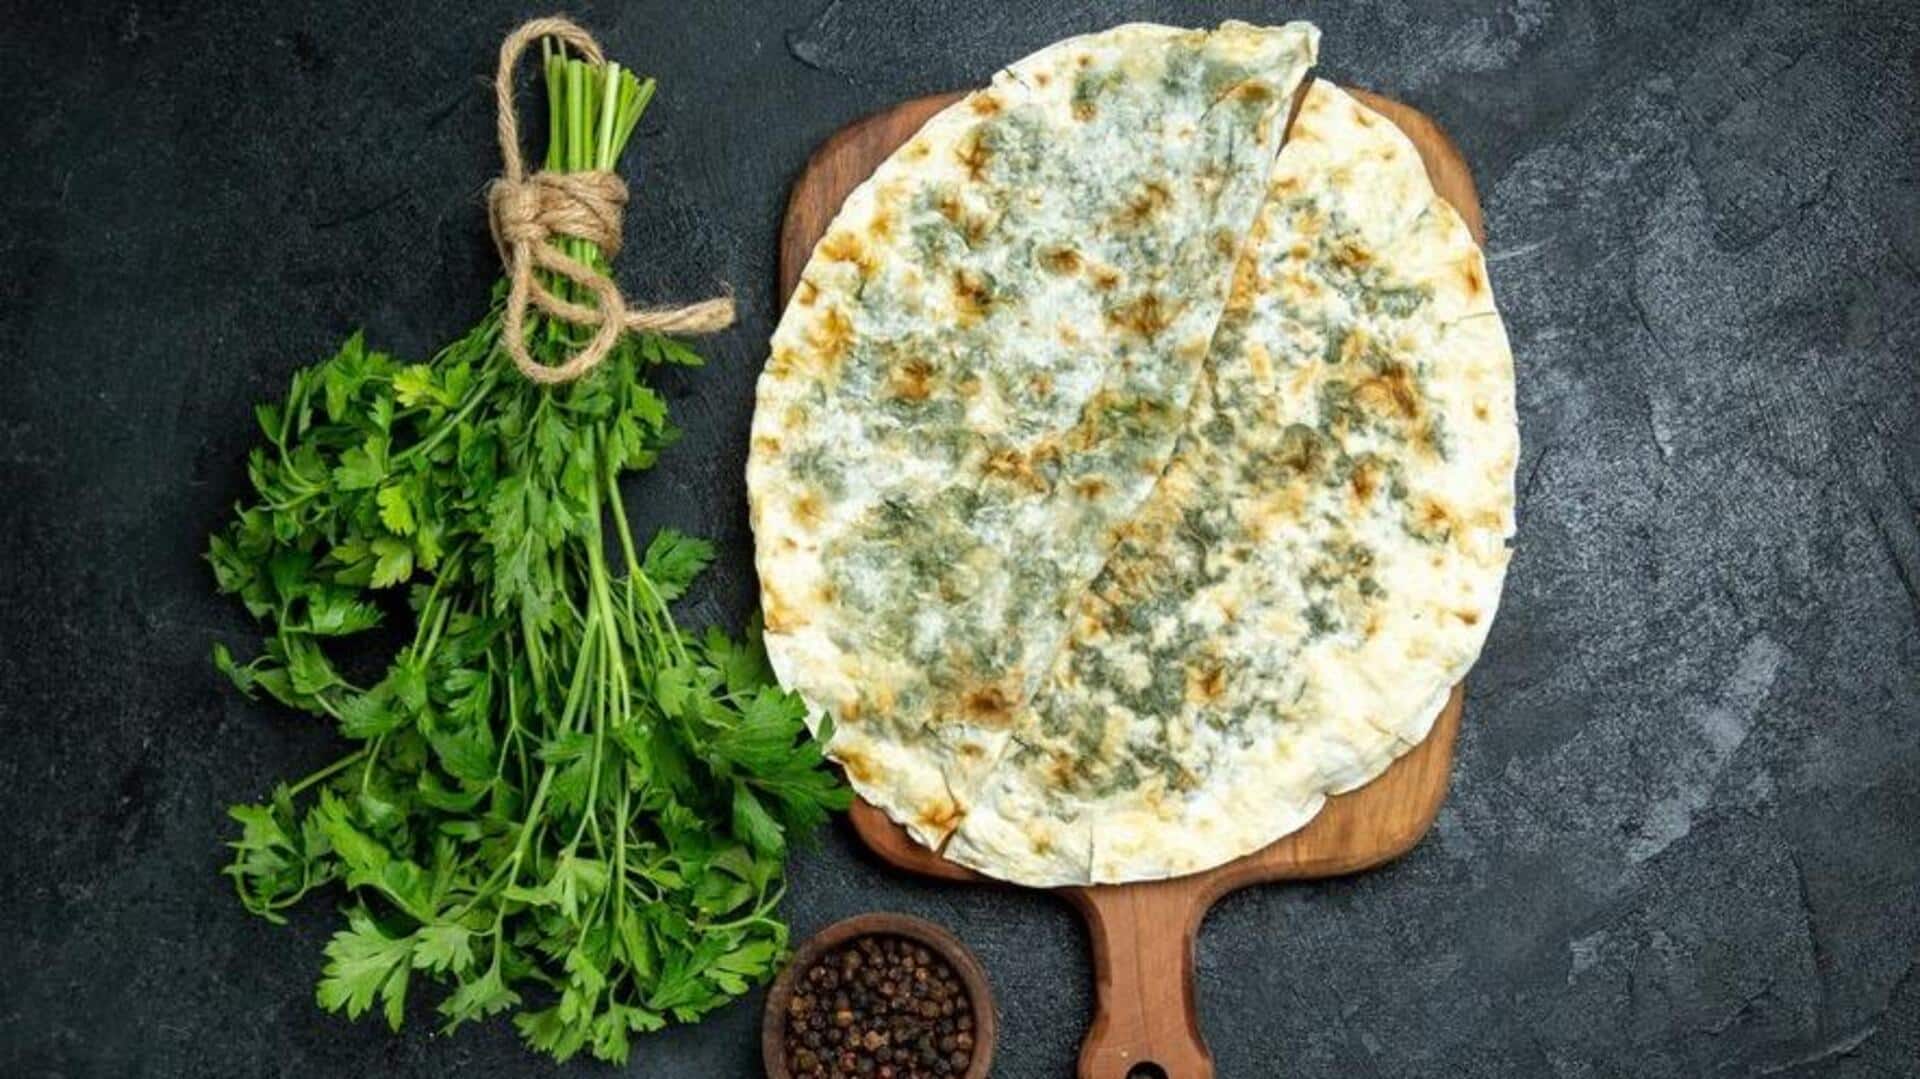 It's recipe time! Cook this savory spinach and feta pie